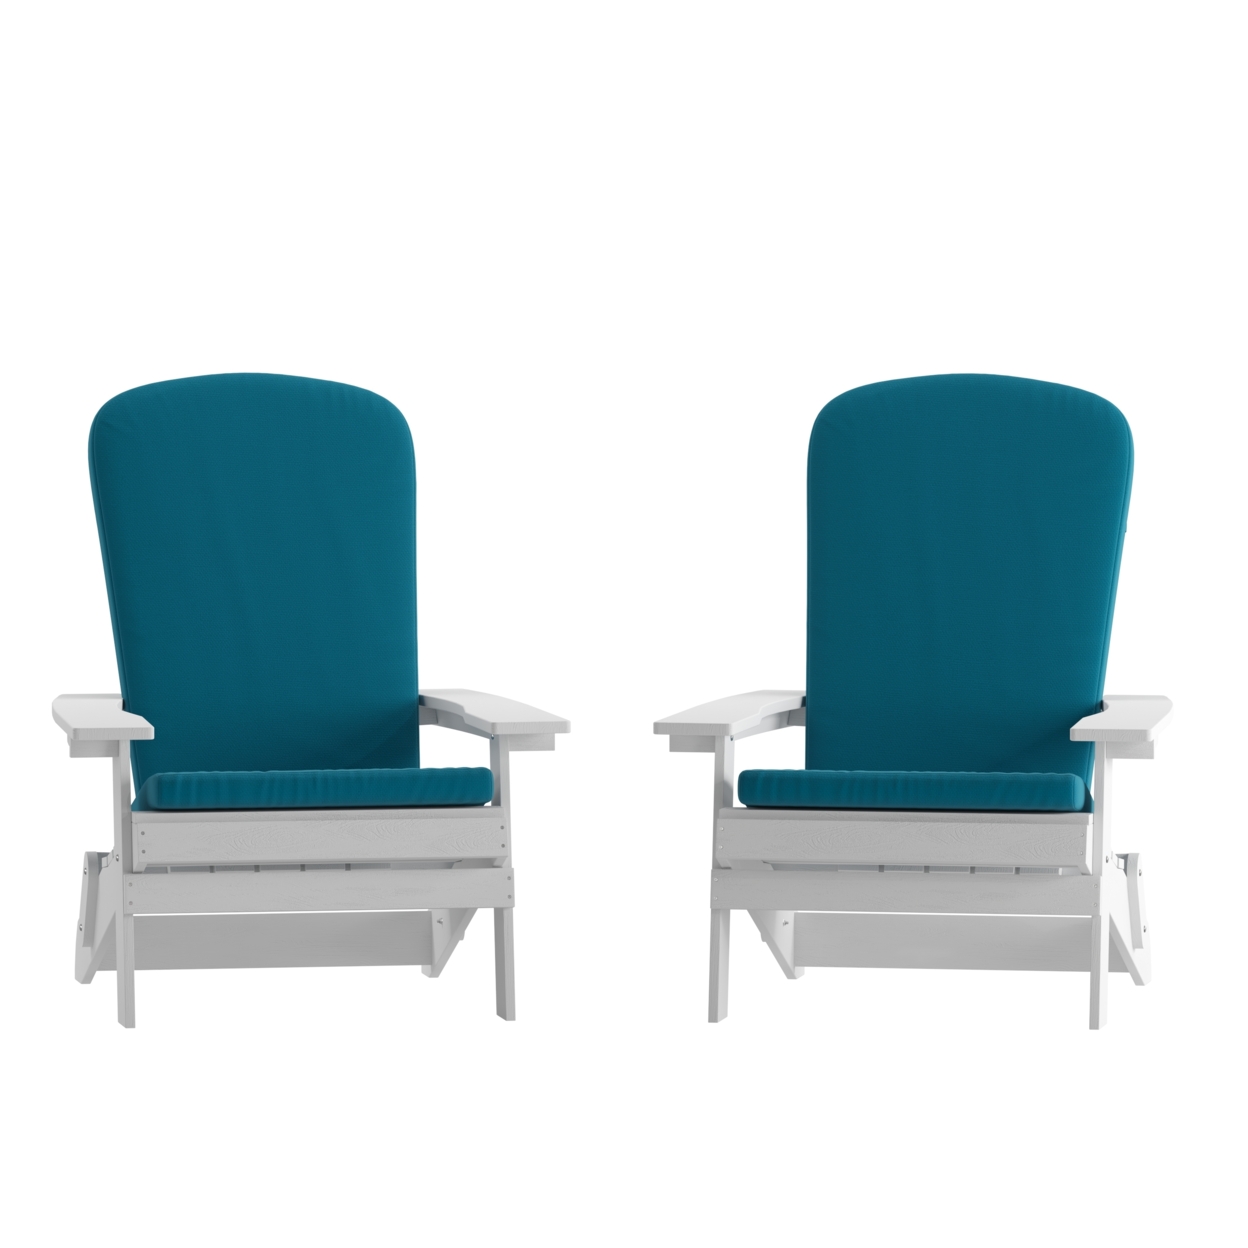 2 Piece Chairs, Vintage White Polyresin, All Weather Teal Cushions